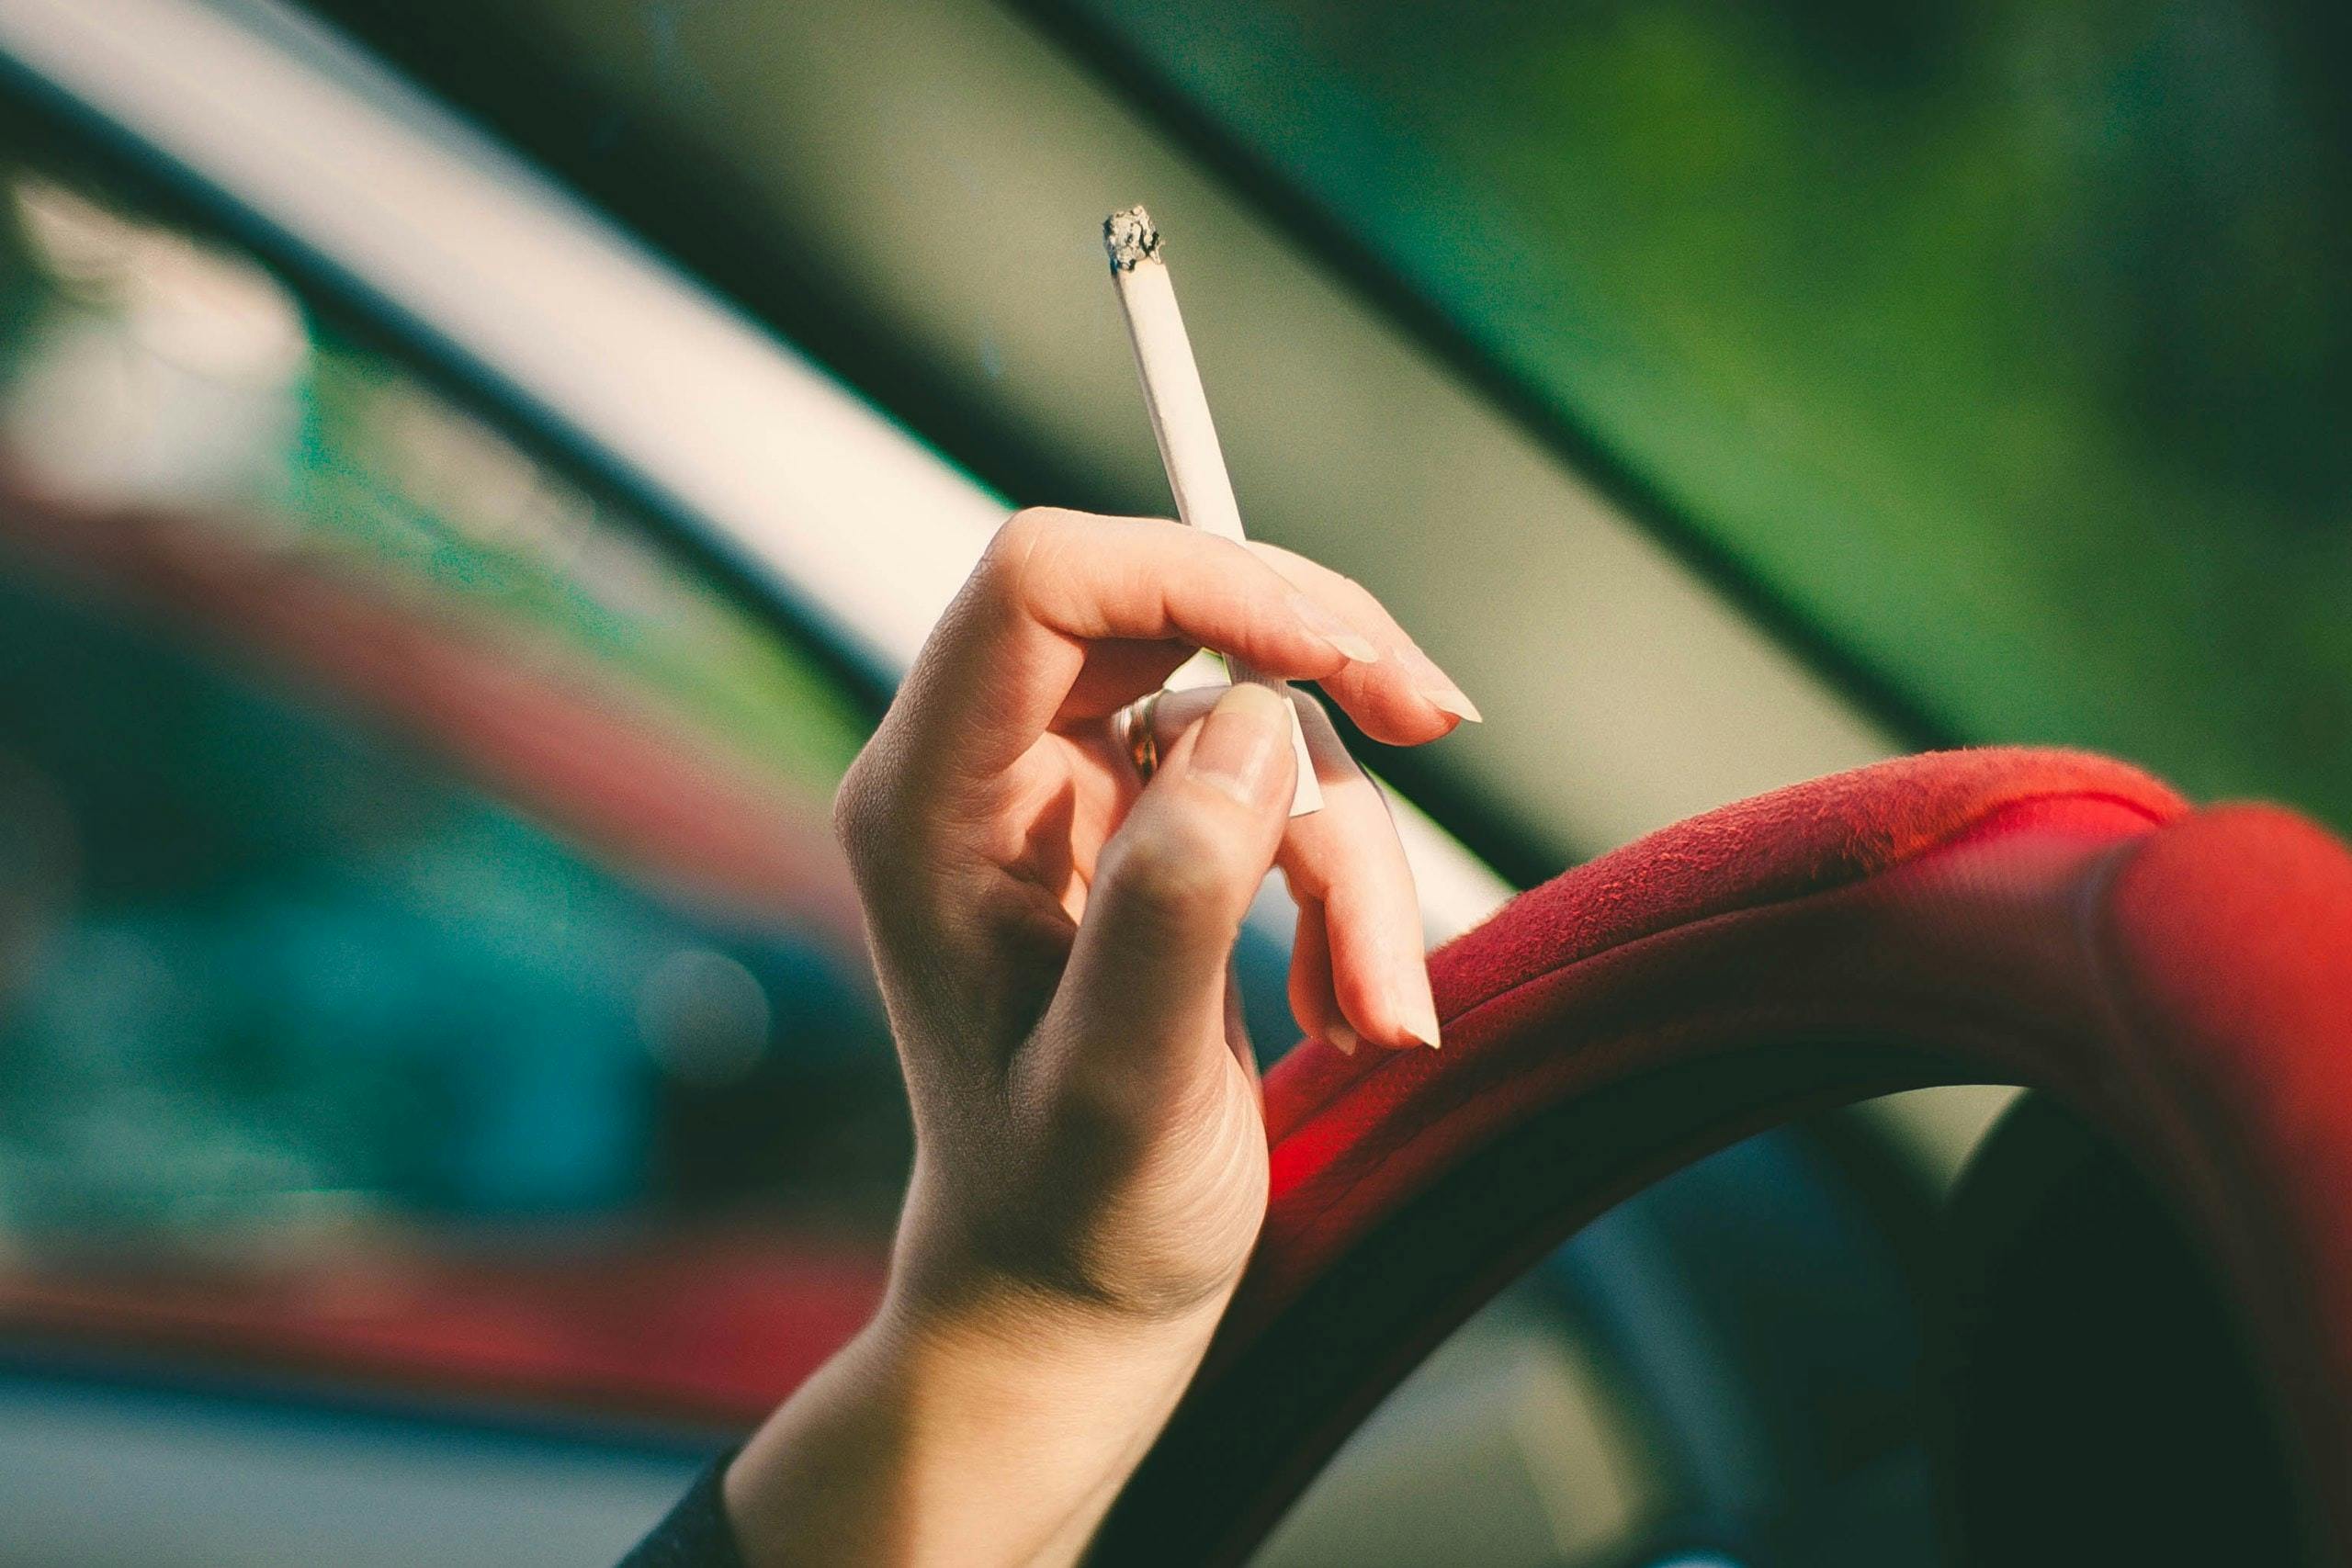 A close-up of a woman's hand resting on a car steering wheel while holding a cigarette.